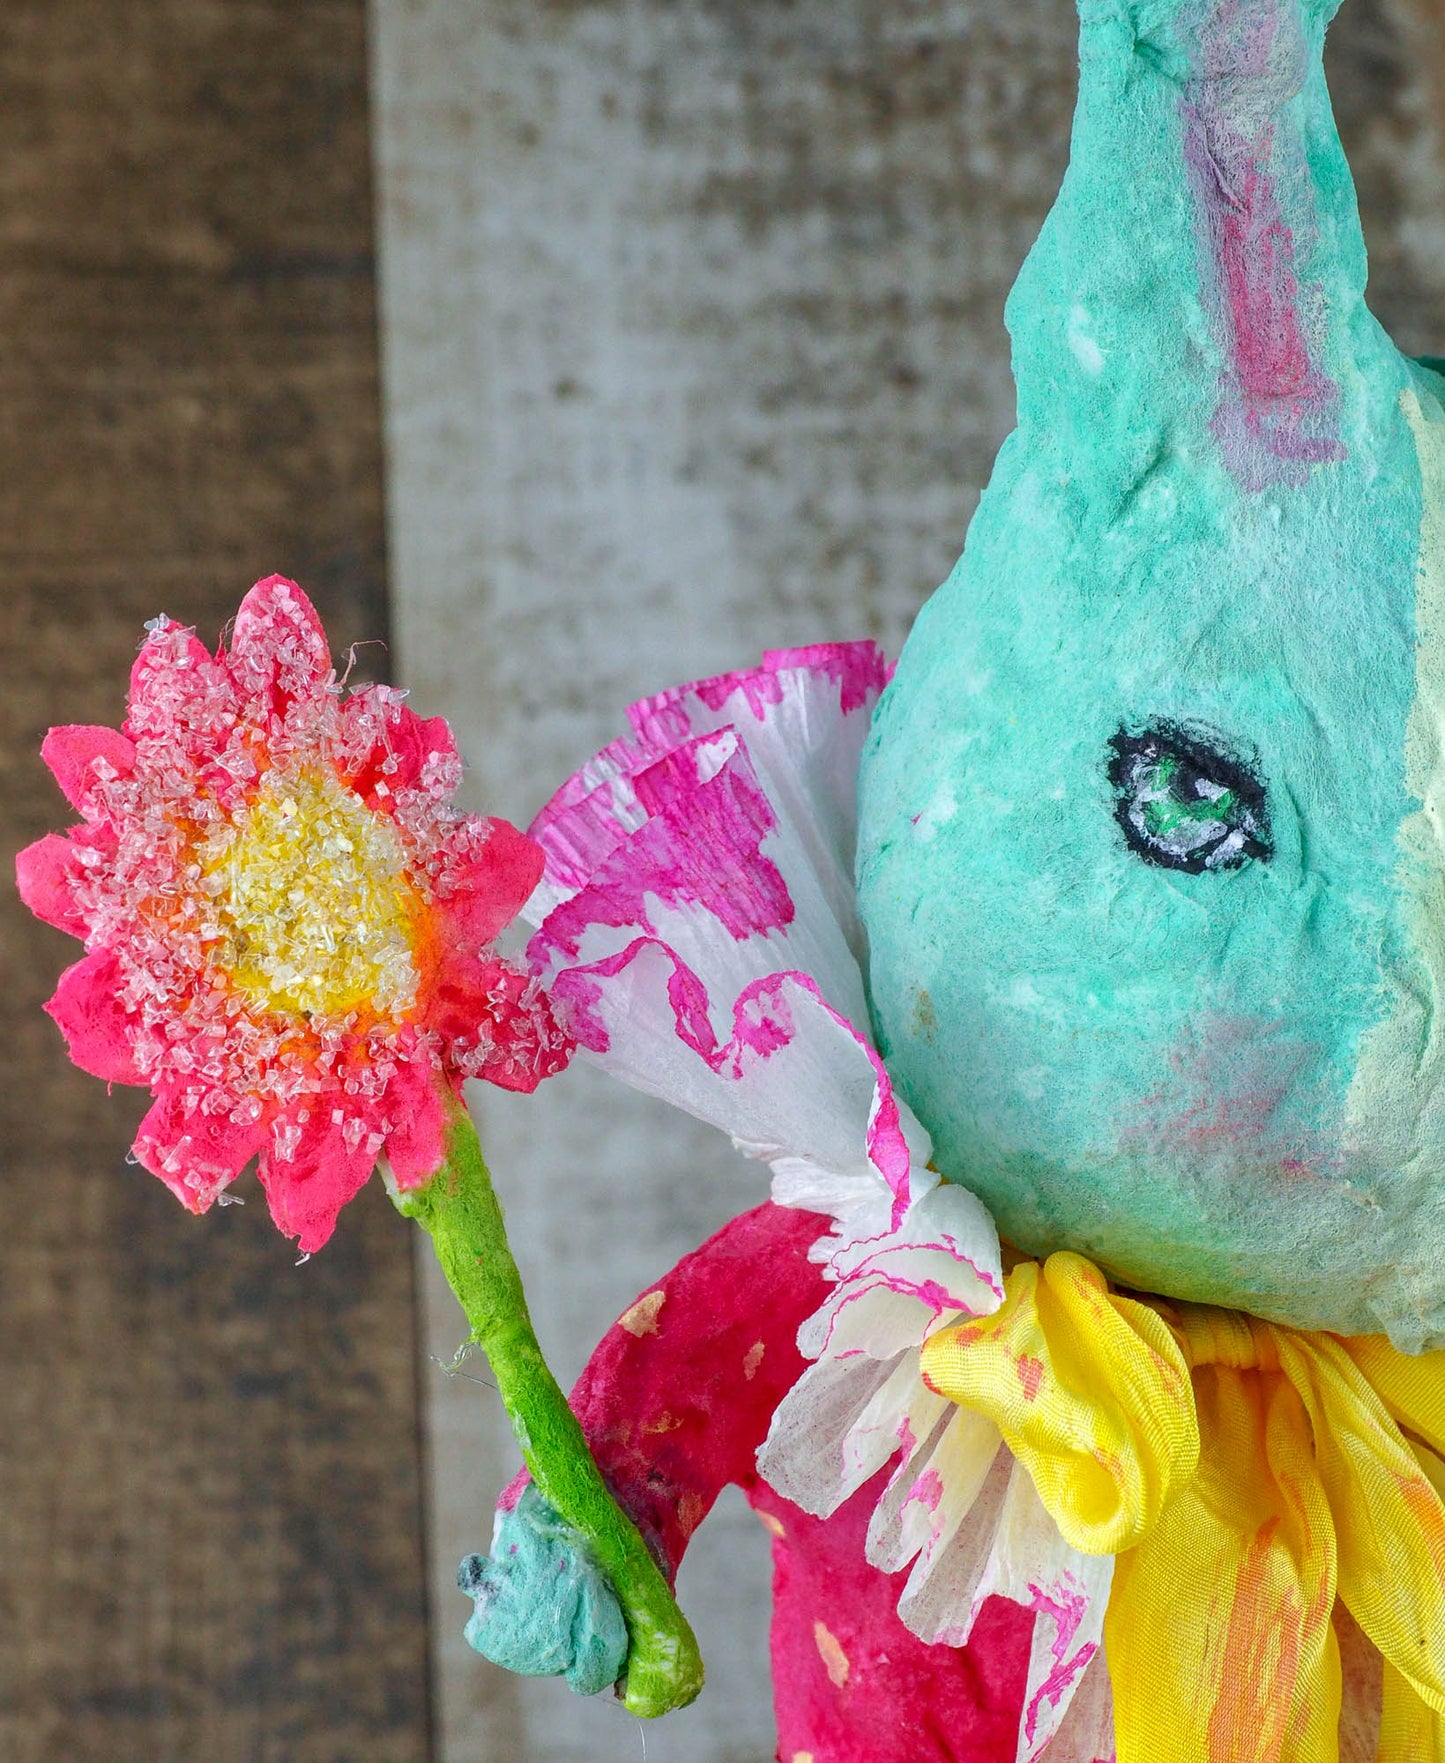 Spring always inspires Danita to make beautiful handmade decorations for when the flowers start to bloom, just like this 10" spun cotton handmade Easter bunny rabbit art doll by Danita, hand painted and dressed in a colorful yellow jumper suit.